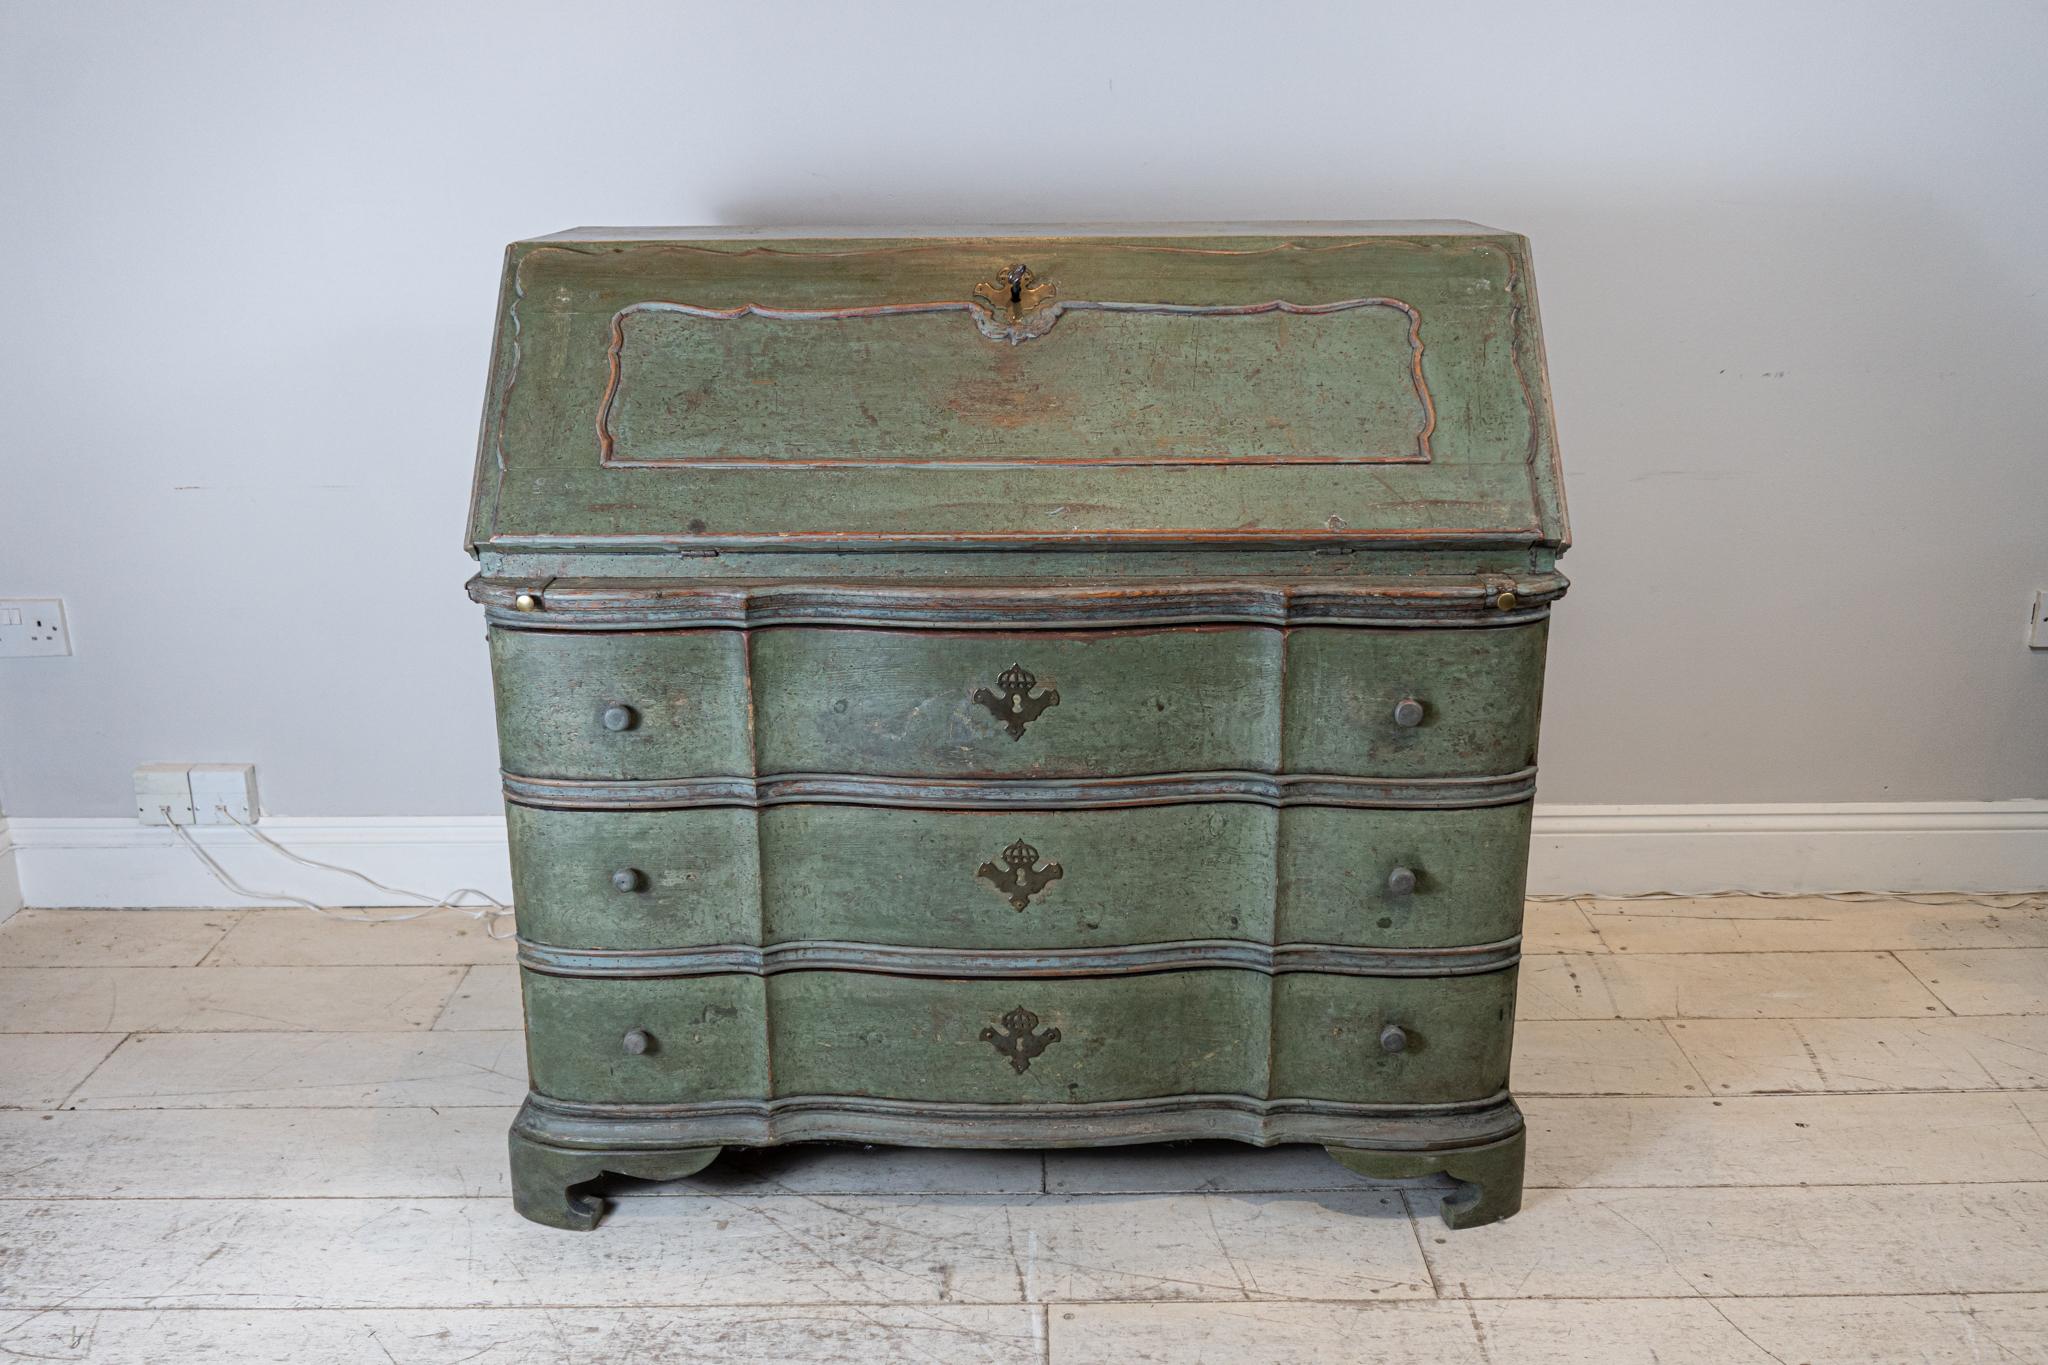 Late Circa 18th century Swedish fall front bureau. The interior comprises of small drawers and compartments over three long deep drawers. The bureau comes in one piece and features decorative iron carrying handles at the sides, and a key.
The paint